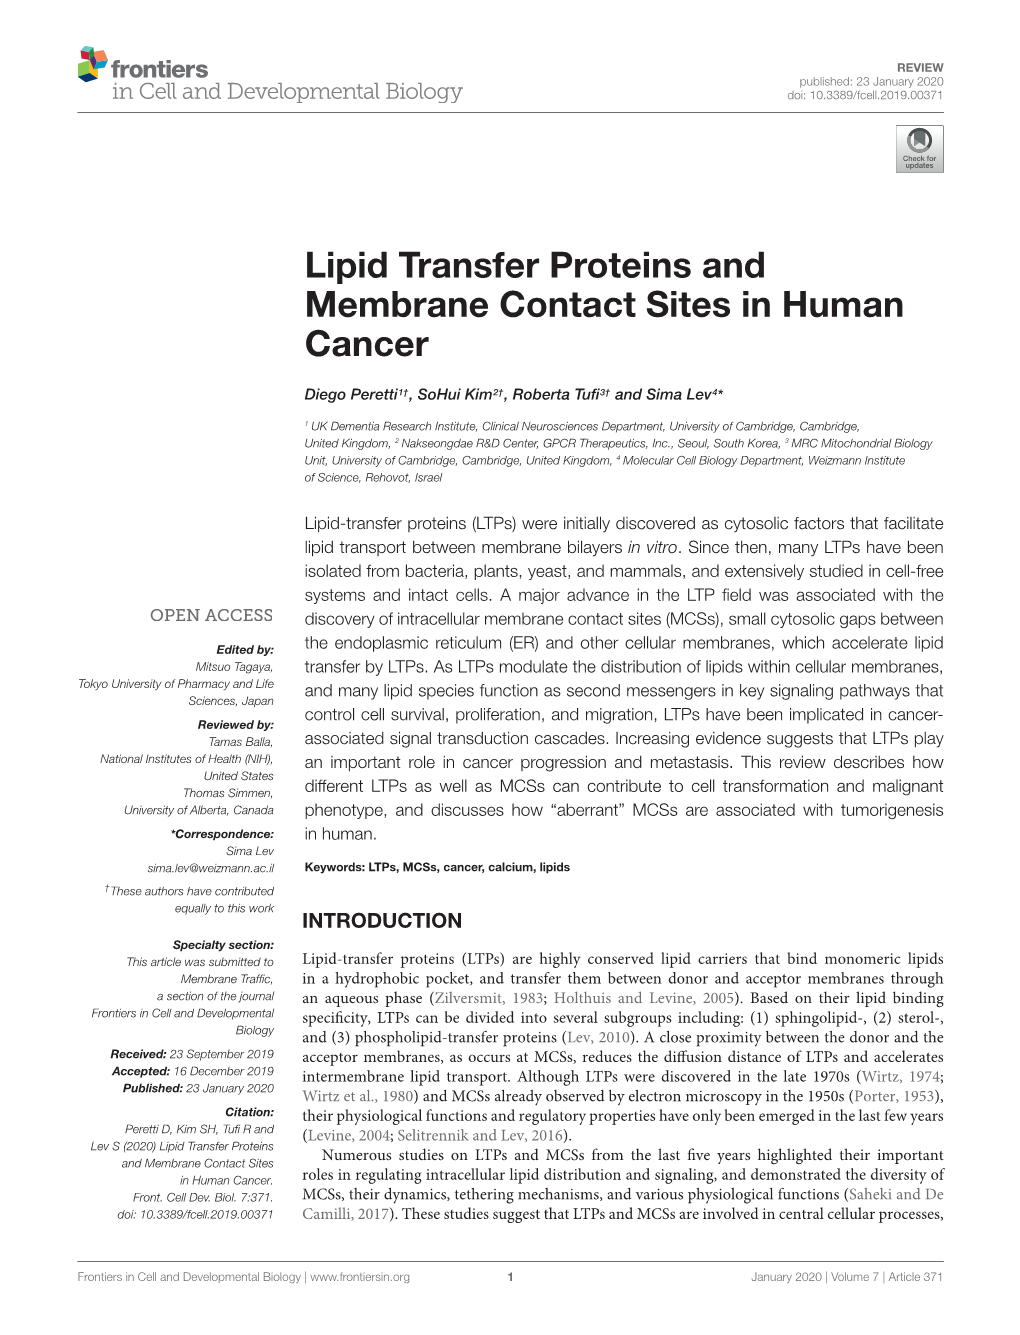 Lipid Transfer Proteins and Membrane Contact Sites in Human Cancer